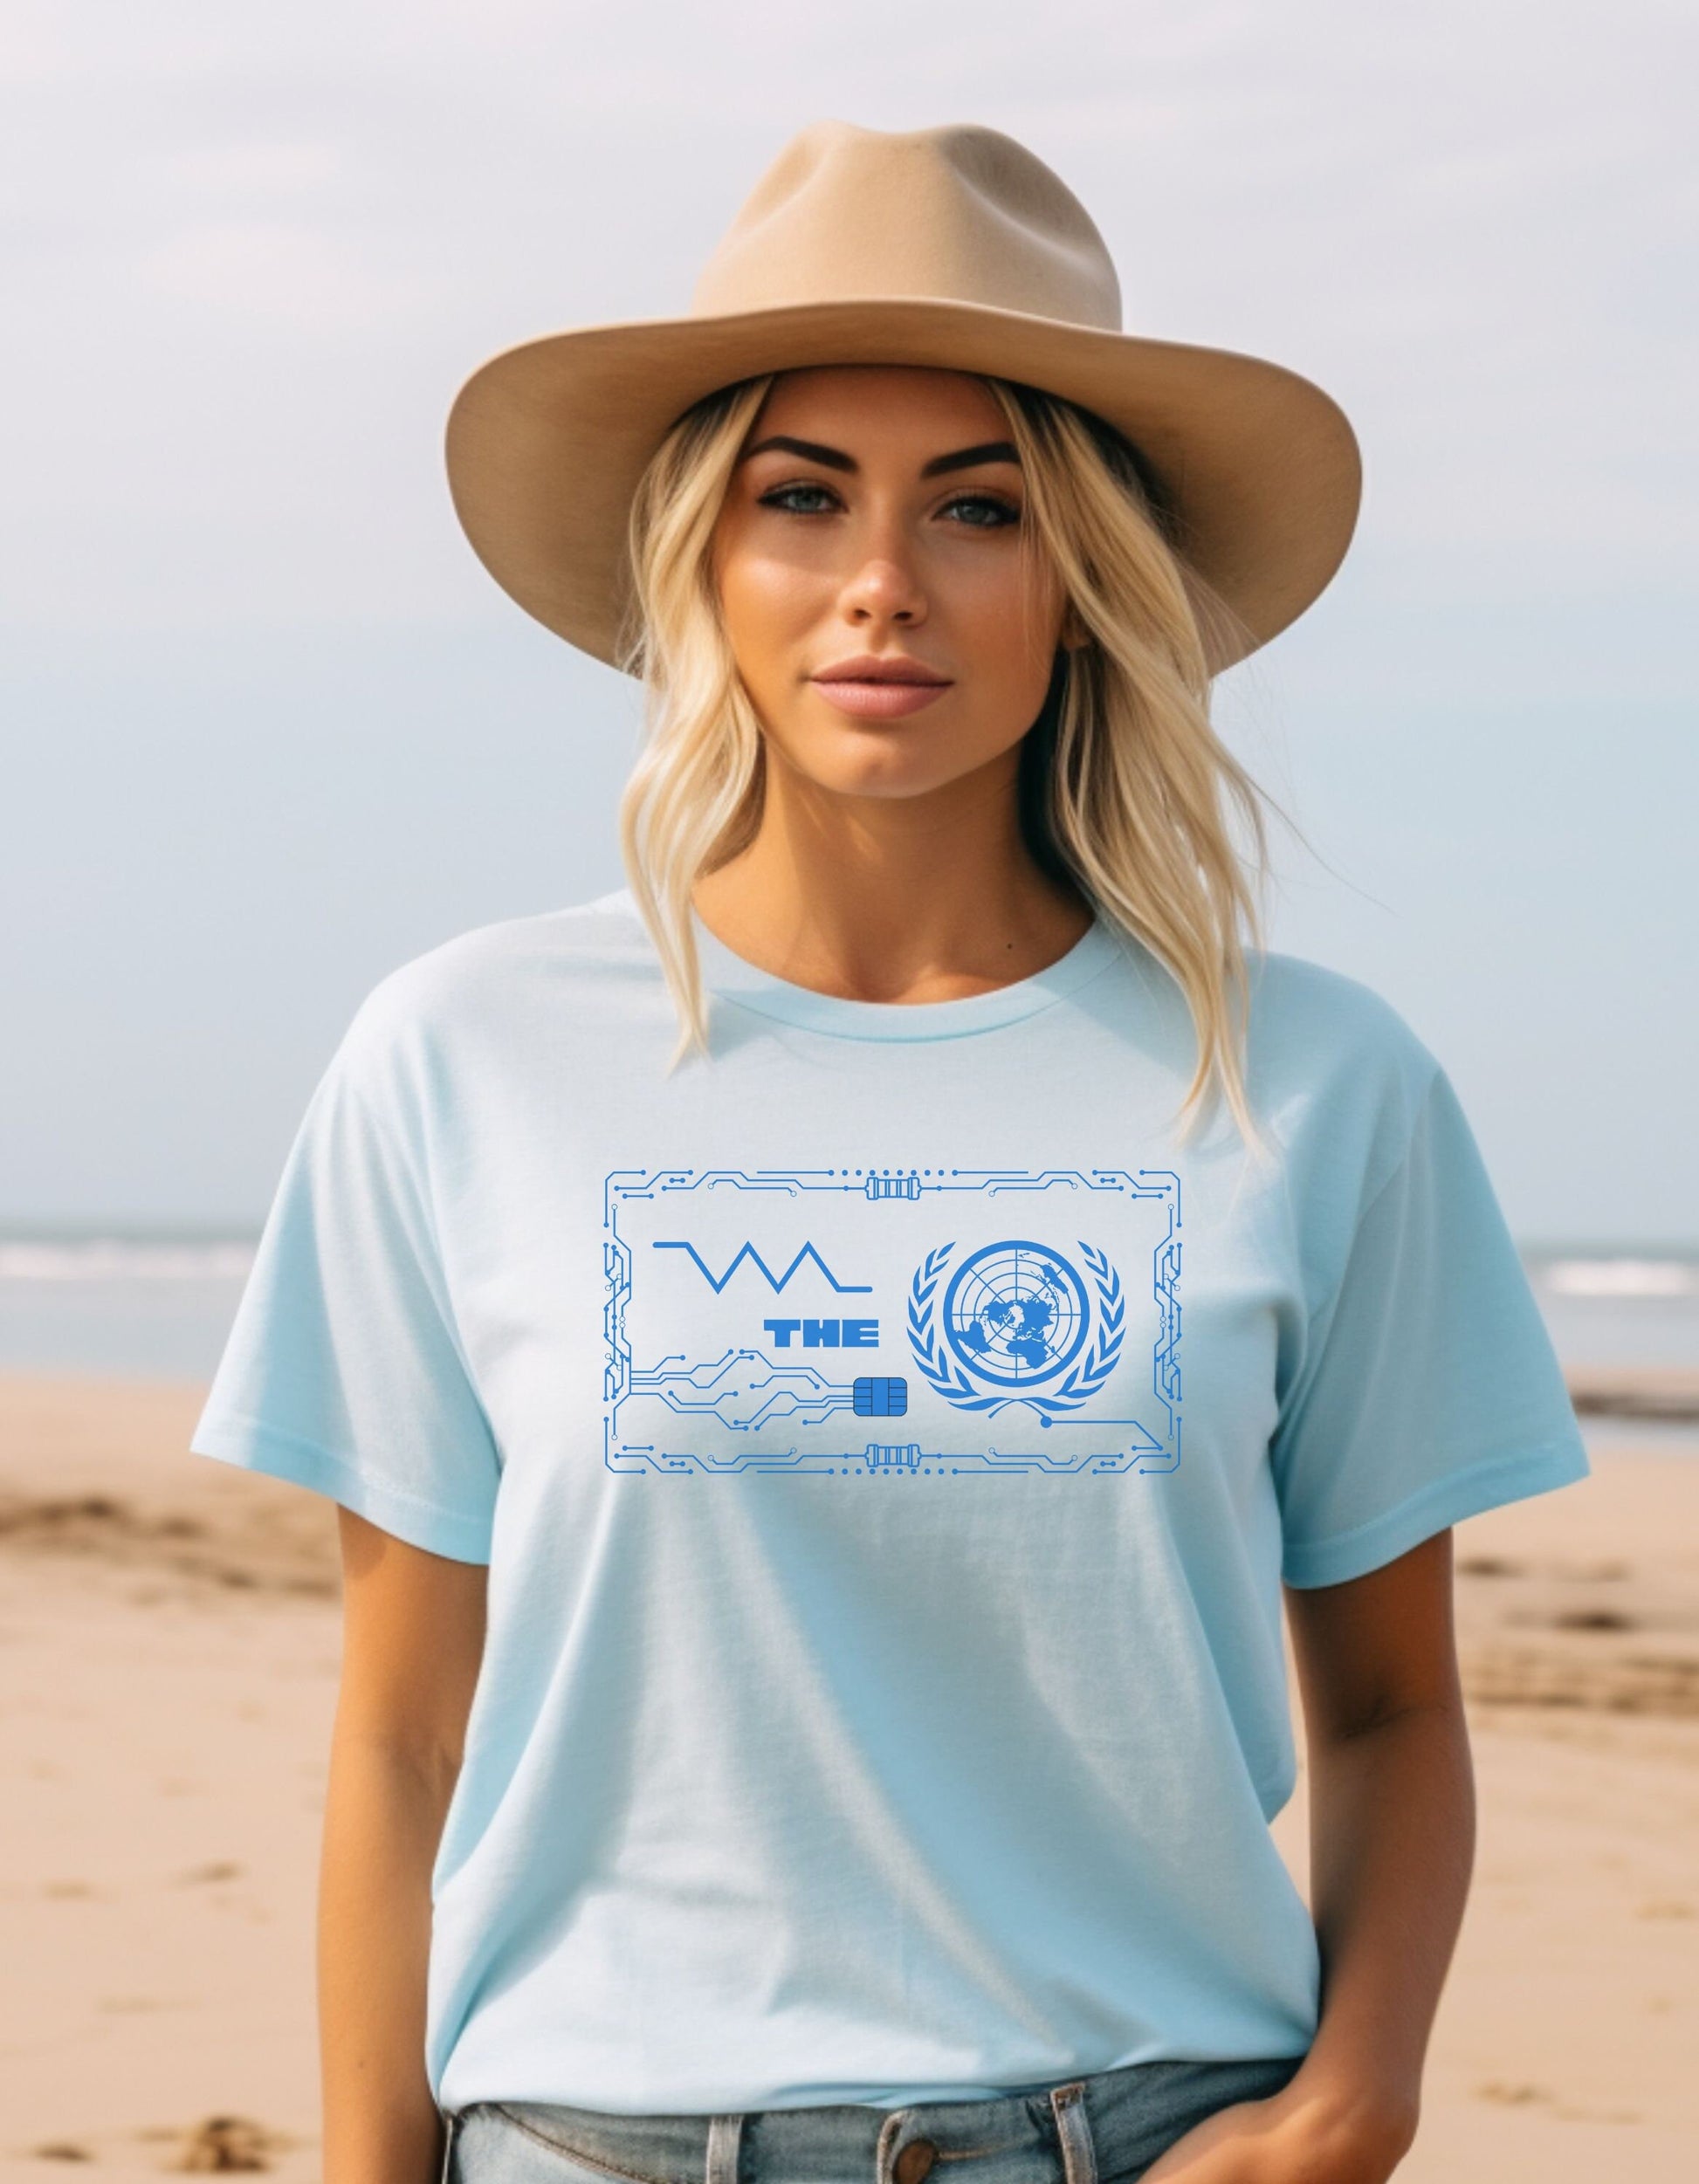 Resist The UN by Revival Men's and Women's Cotton T-Shirt, Gift for Men, Gift for Women